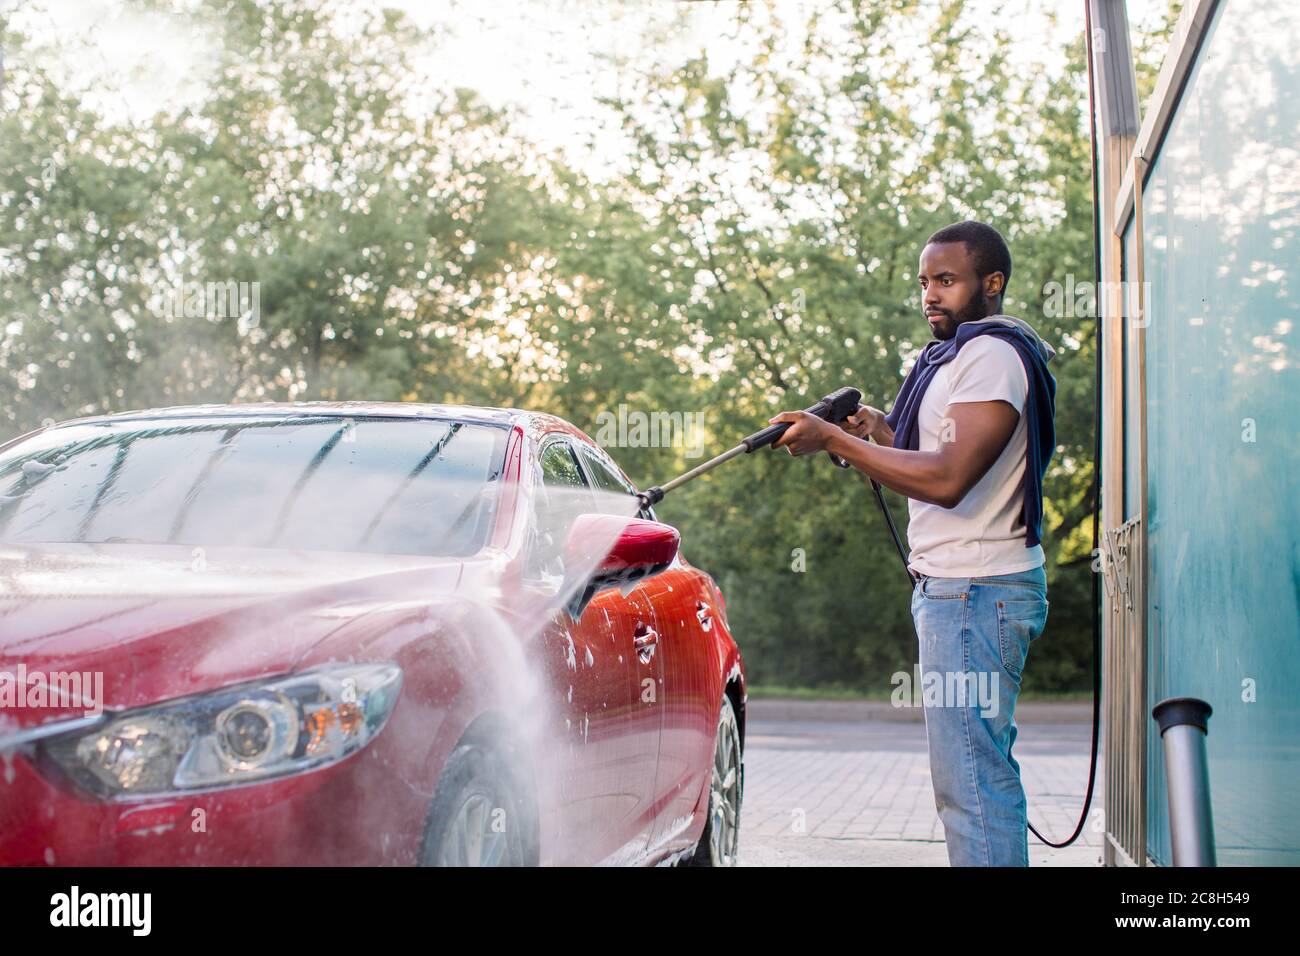 Optage Akvarium afregning Car wash service outdoors. African guy in white t-shirt and jeans, washing  red luxury car with water gun on an open air self car wash Stock Photo -  Alamy